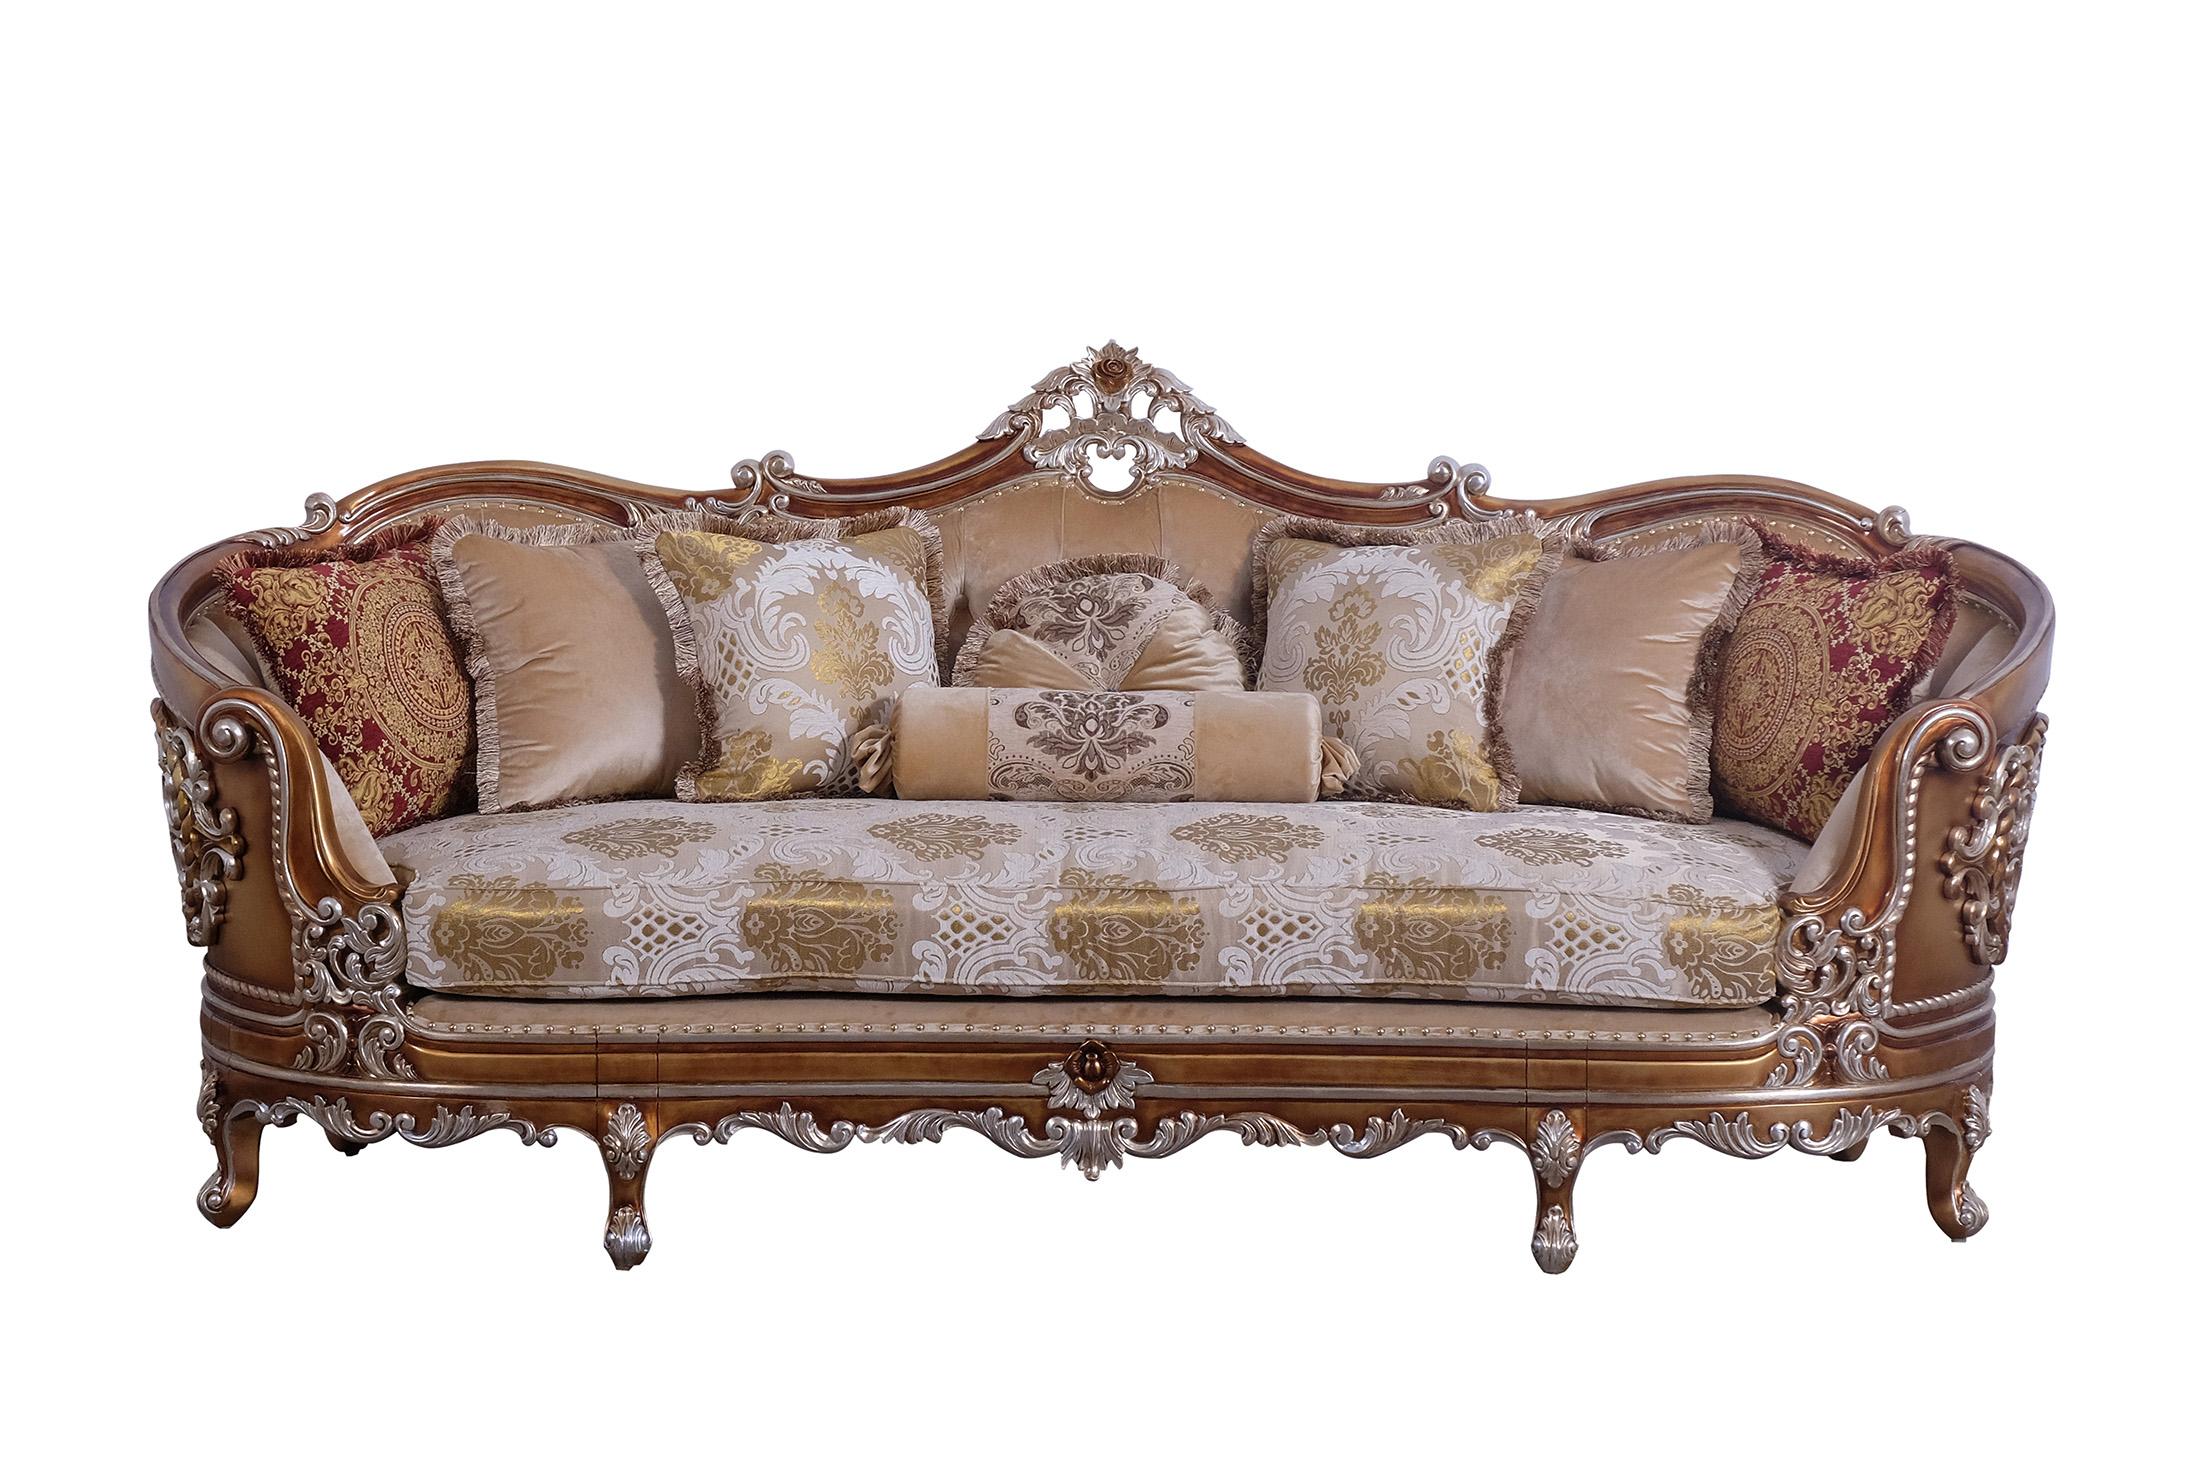 Classic, Traditional Sofa SAINT GERMAIN 35550-S in Sand, Gold Fabric